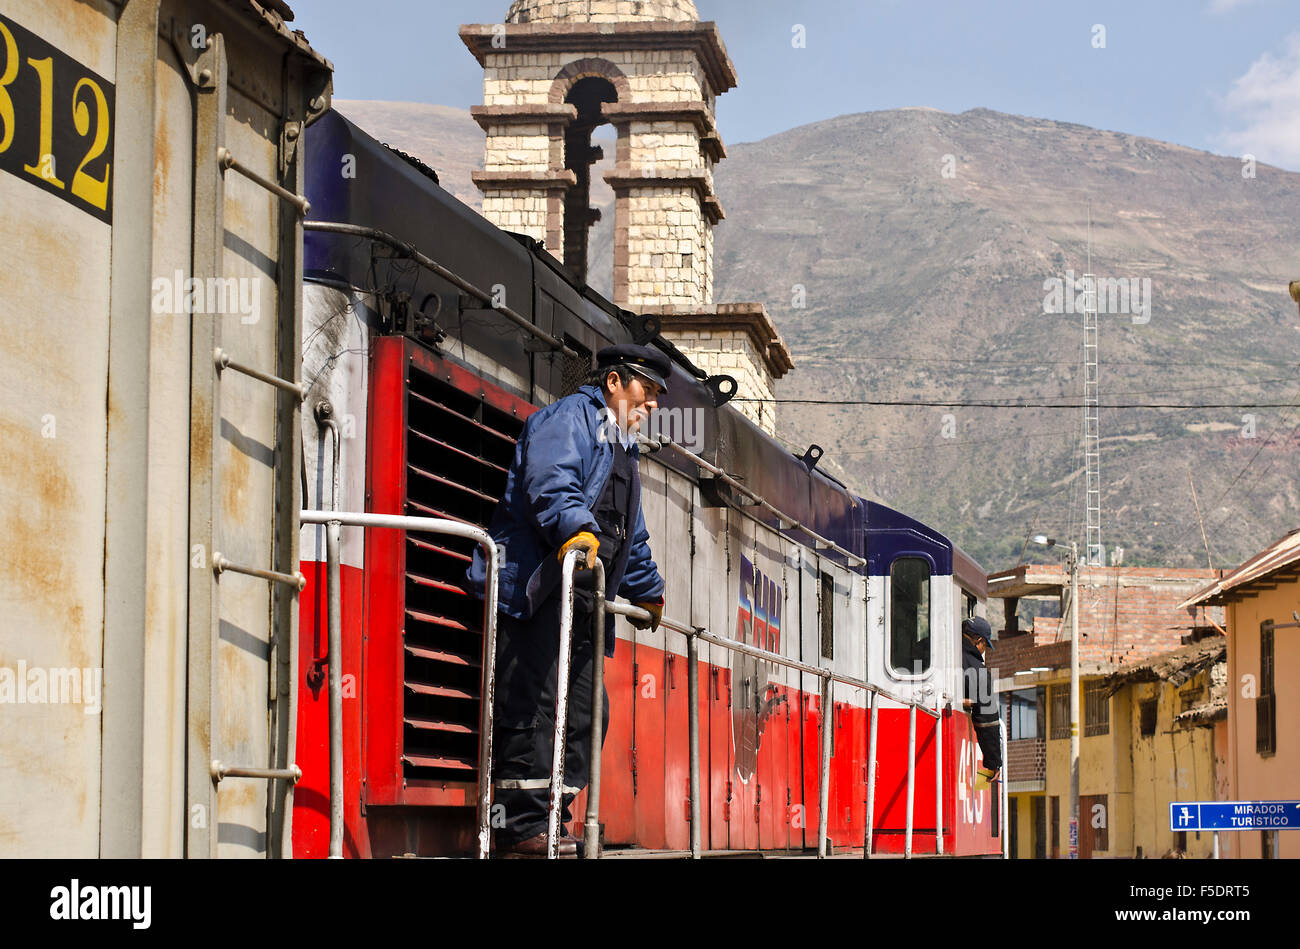 The ‘Tren Macho’ train, which covers the Huancayo – Huancavelica route, can carry up to 370 passengers. Stock Photo